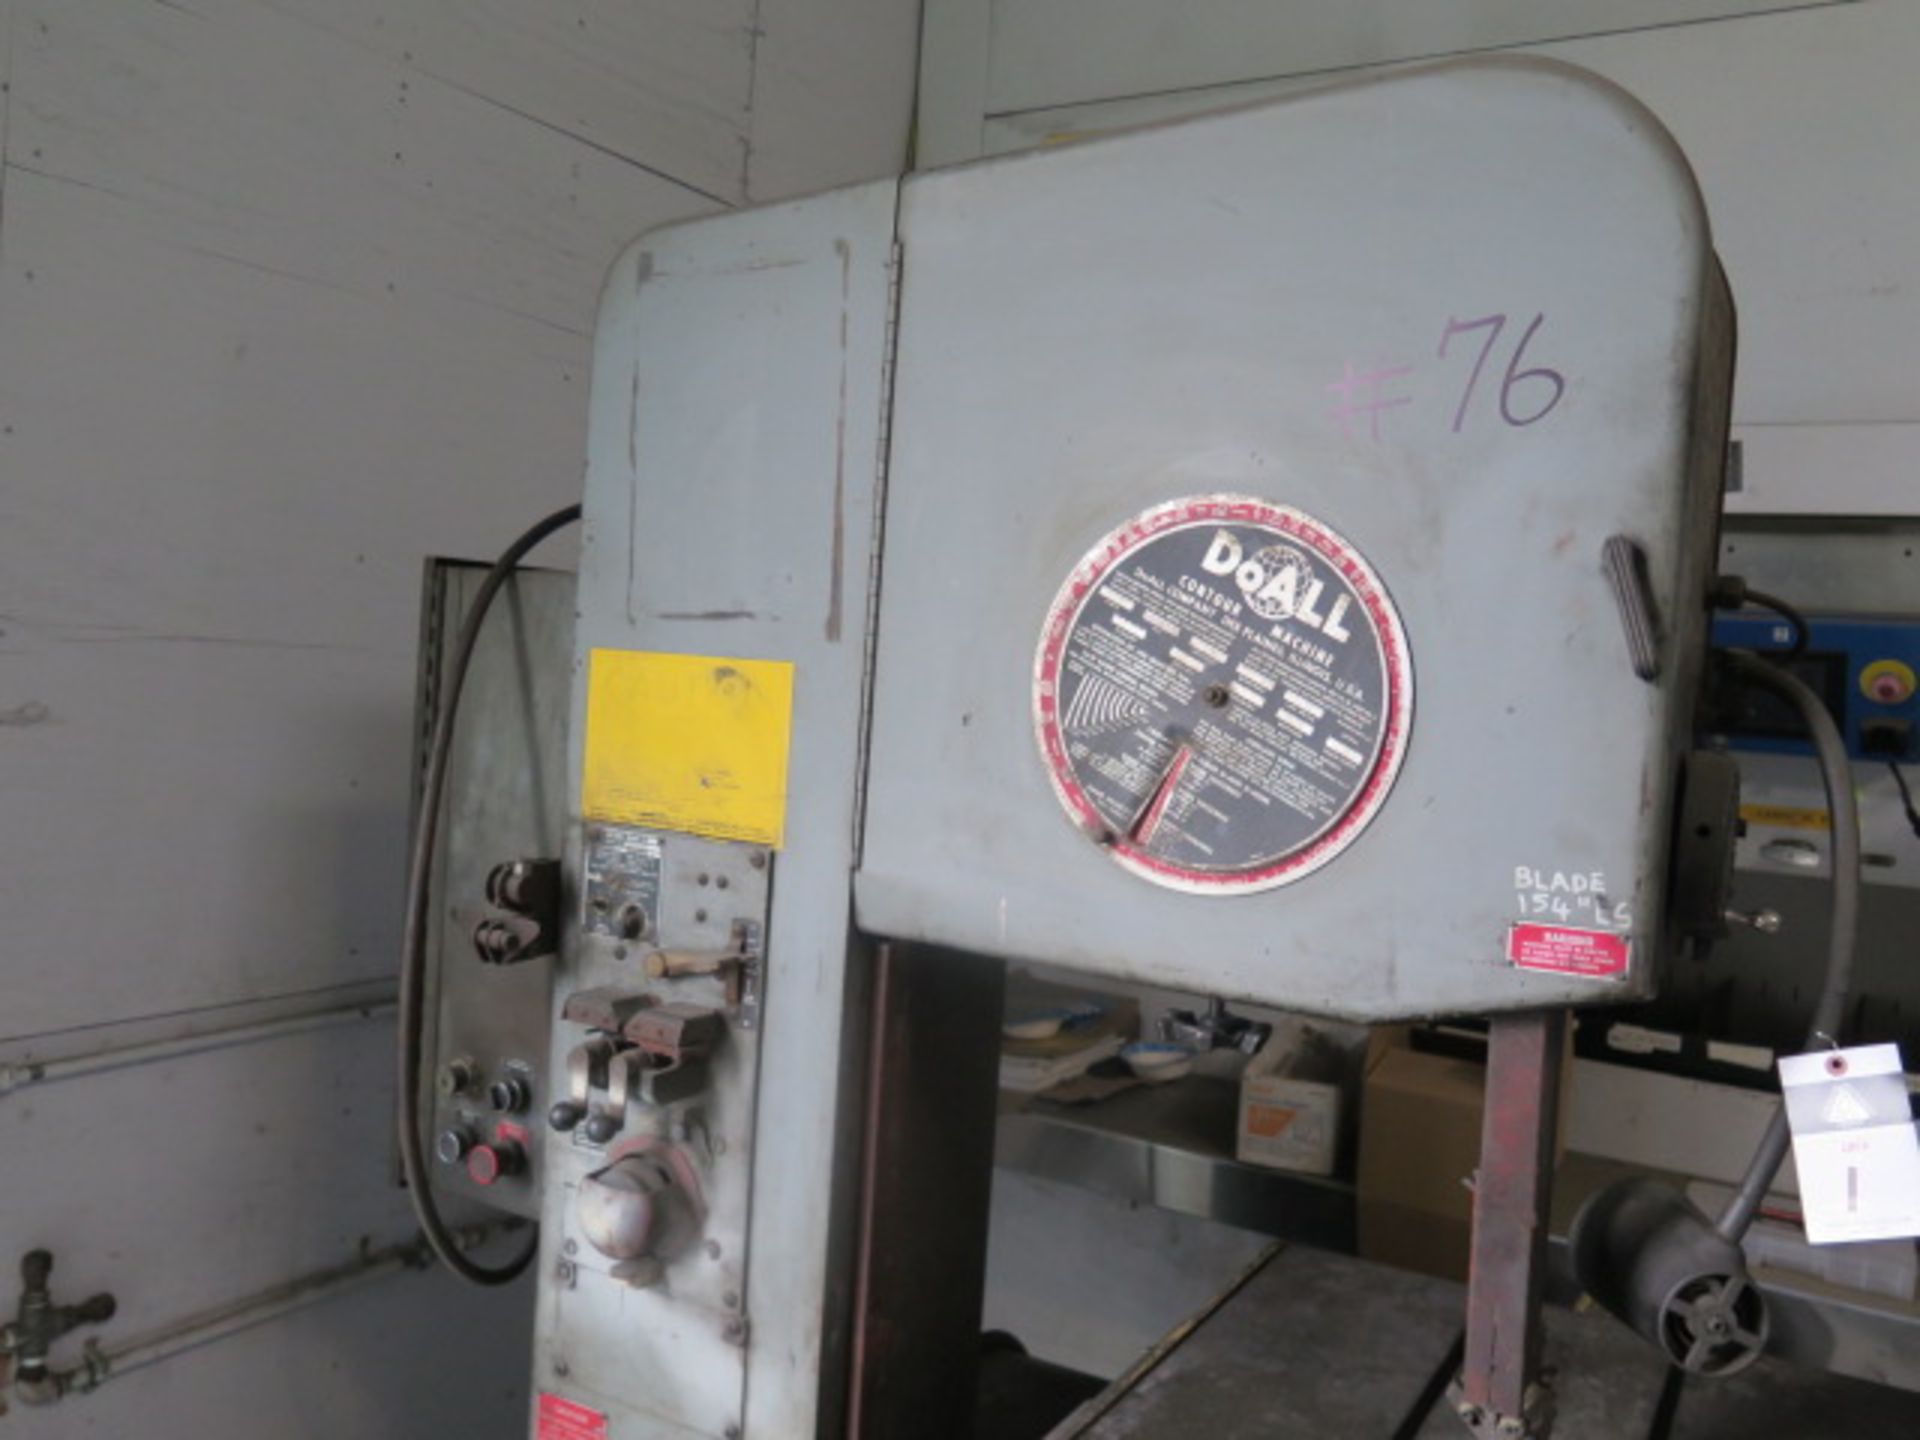 DoAll 2012-1A 20” Vertical Band Saw s/n 340-78413 w/ Blade Welder, 50-5200 FPM, SOLD AS IS - Image 3 of 8